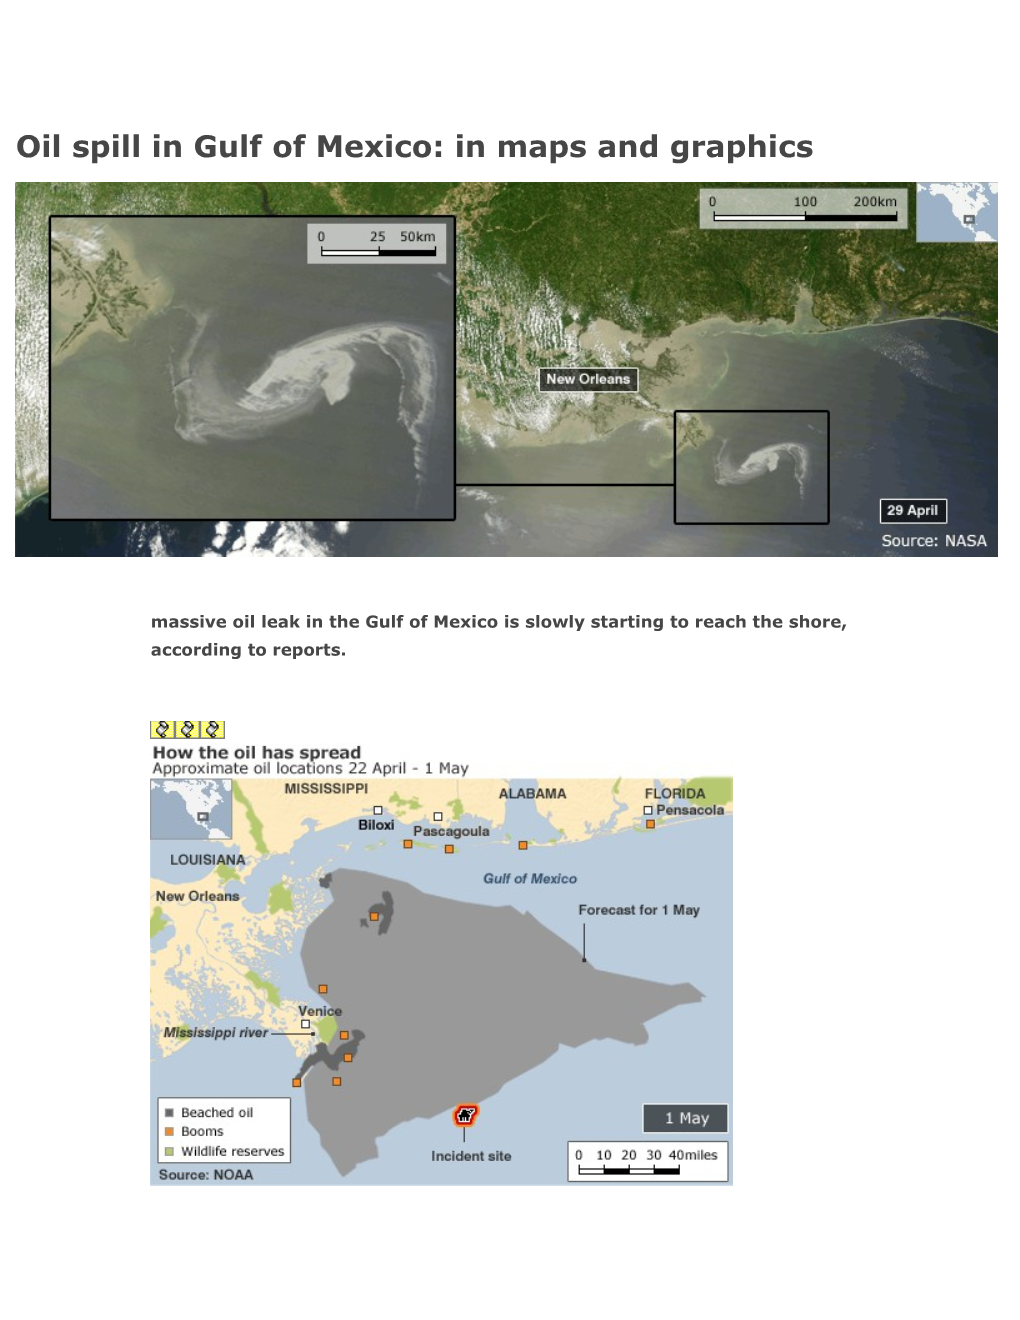 Oil Spill in Gulf of Mexico: in Maps and Graphics